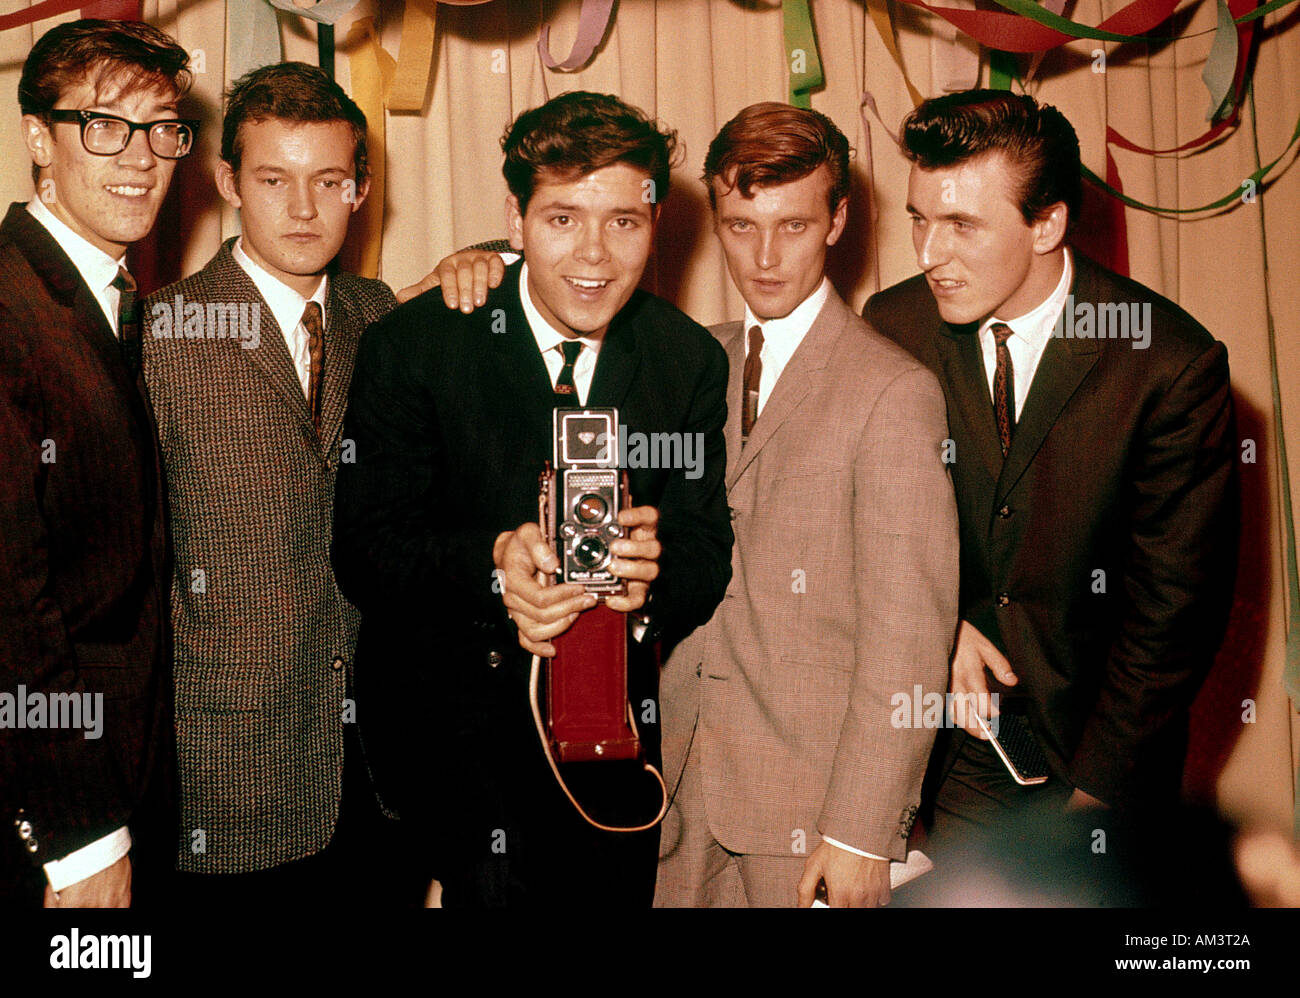 CLIFF RICHARD English pop singer with his band The Shadows at his birthday party in 1961. For names see Description below. Stock Photo